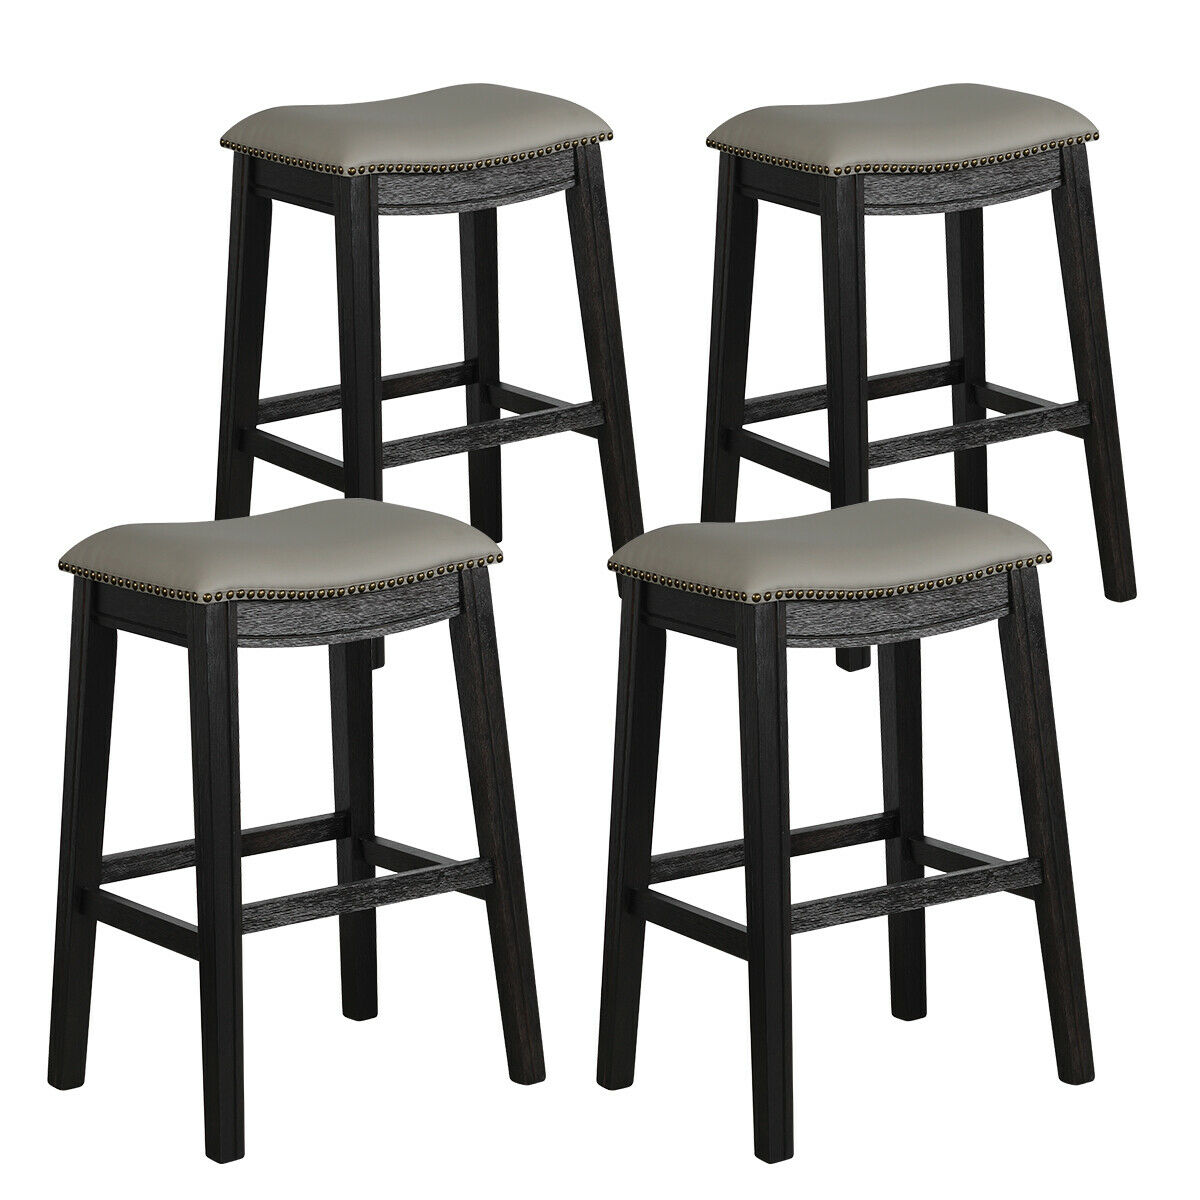 Top Set Of 4 Kitchen Counter Chair, Leather Saddle Seat Counter Stools